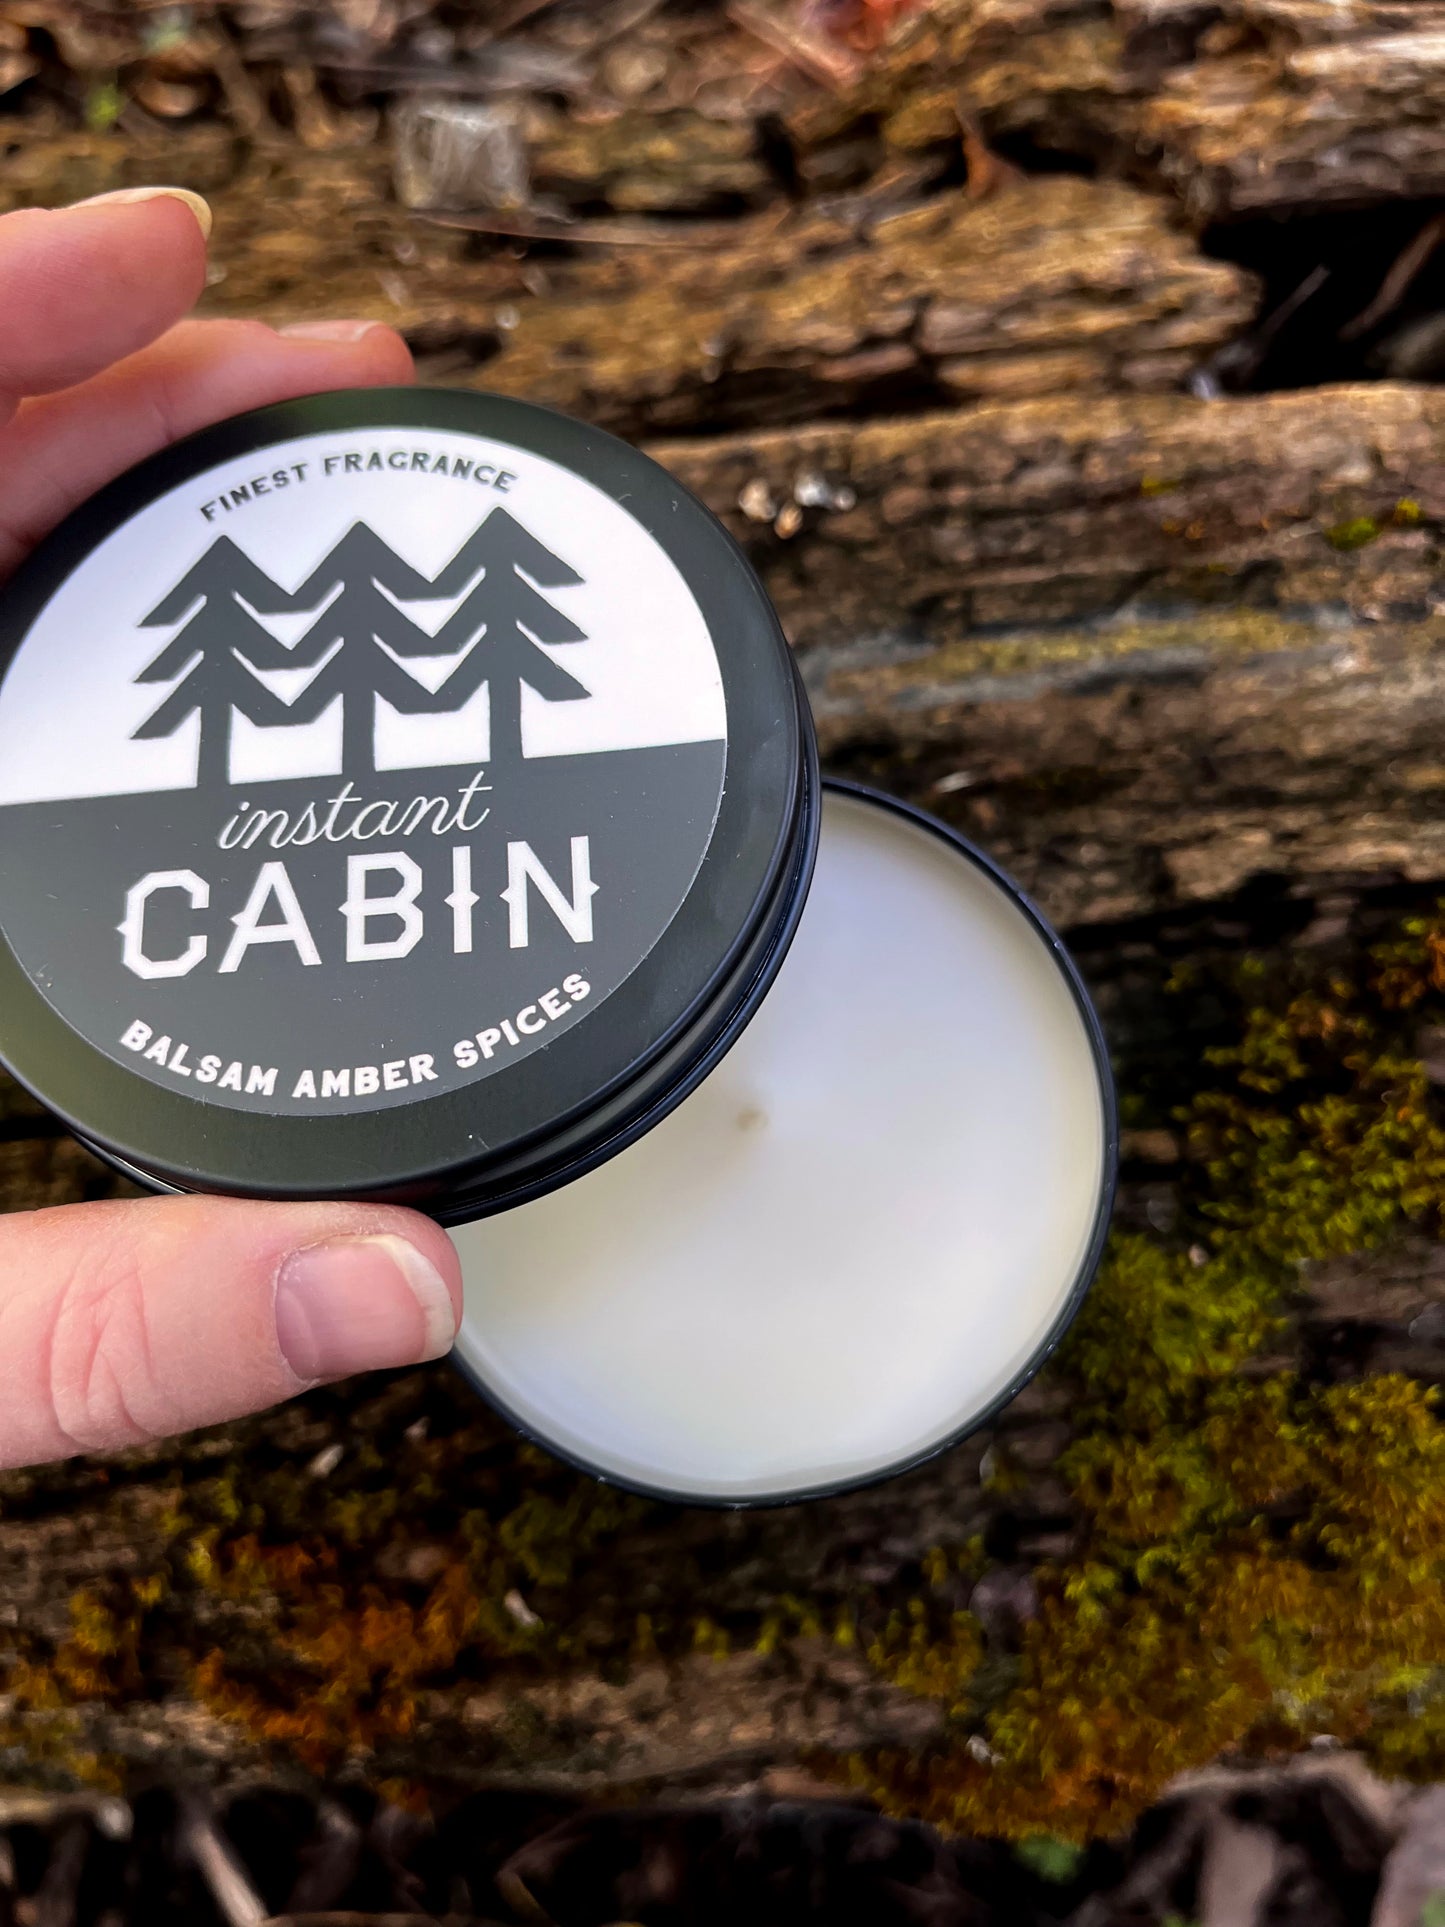 Instant Cabin Scented Candle Tin